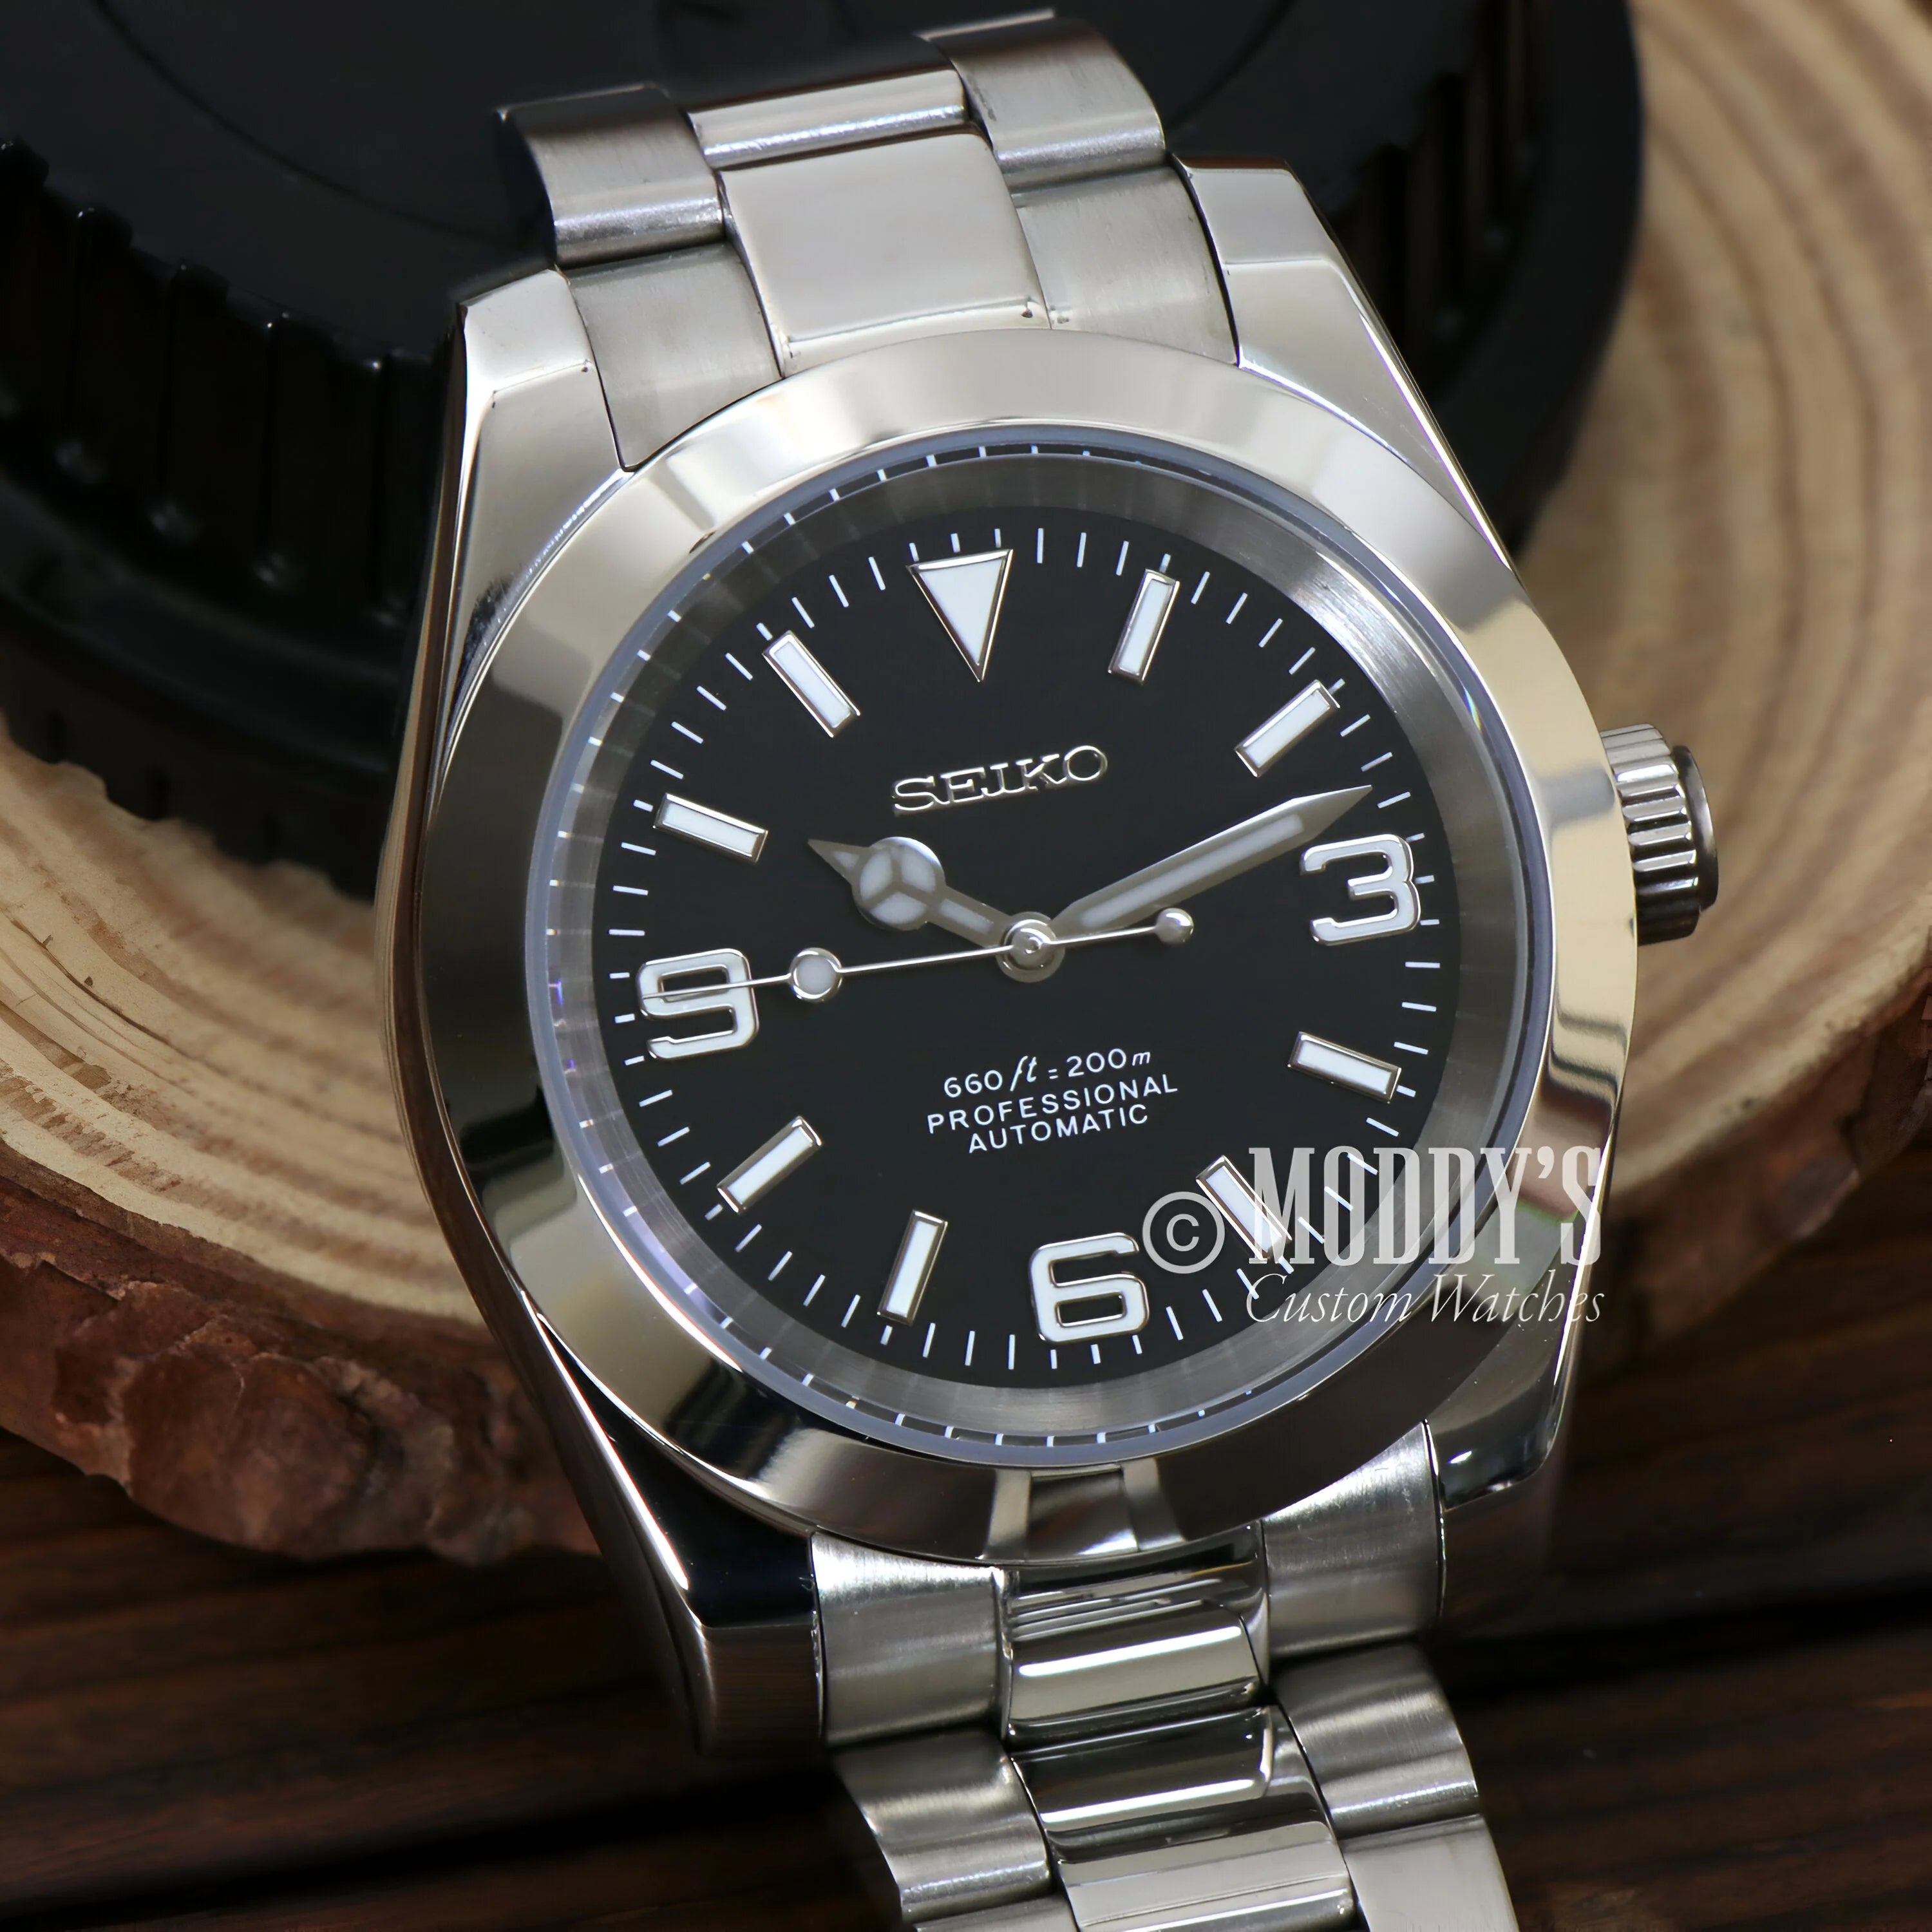 Oysteiko Black Explorer: Seiko Mod Oyster Automatic Watch With Black Dial And Steel Bracelet